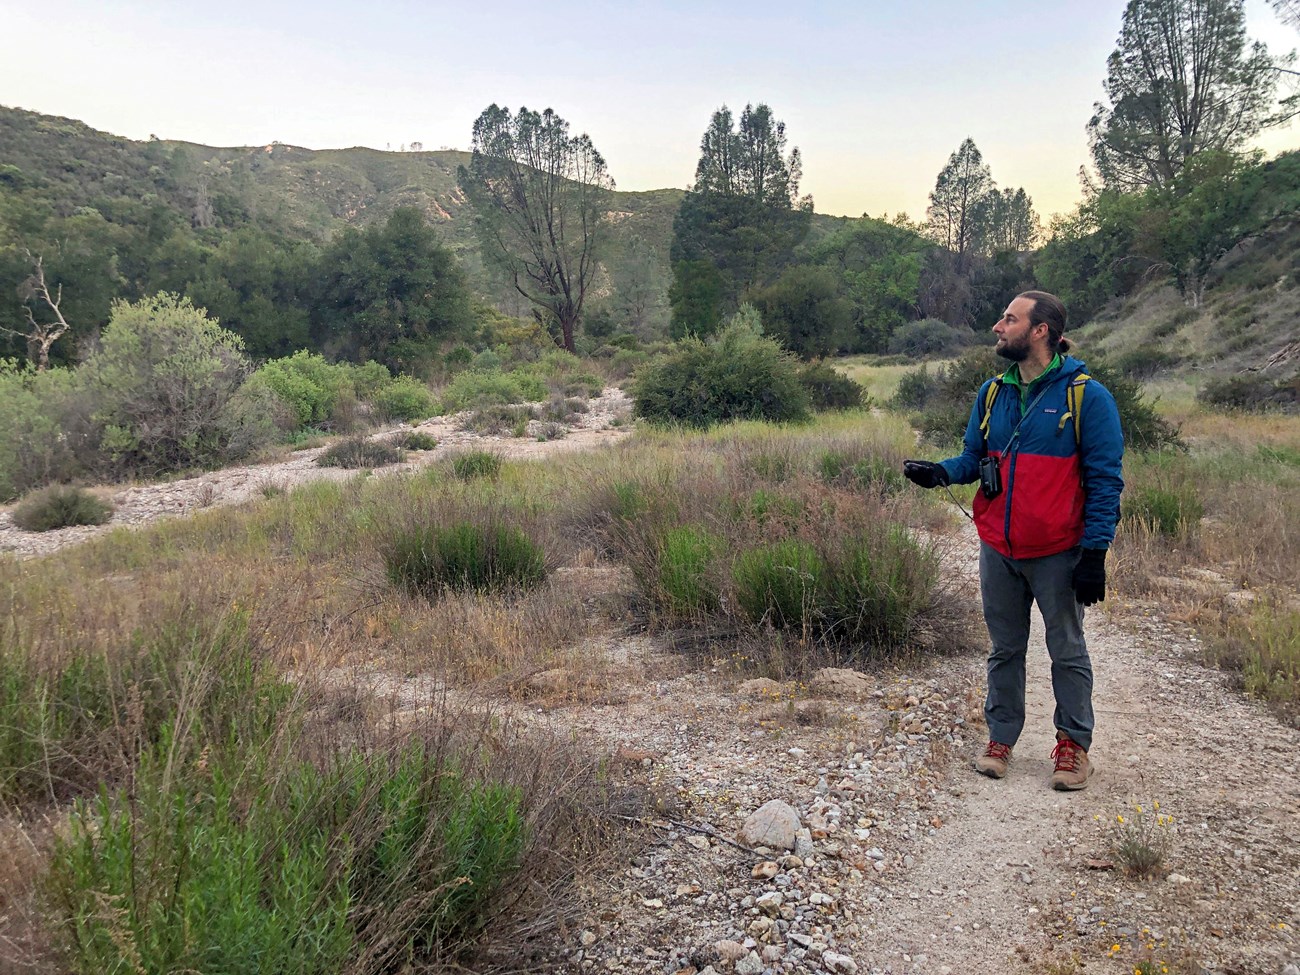 Person pauses on a trail beside a dry creek bed to get a reading from his hand-held GPS device.